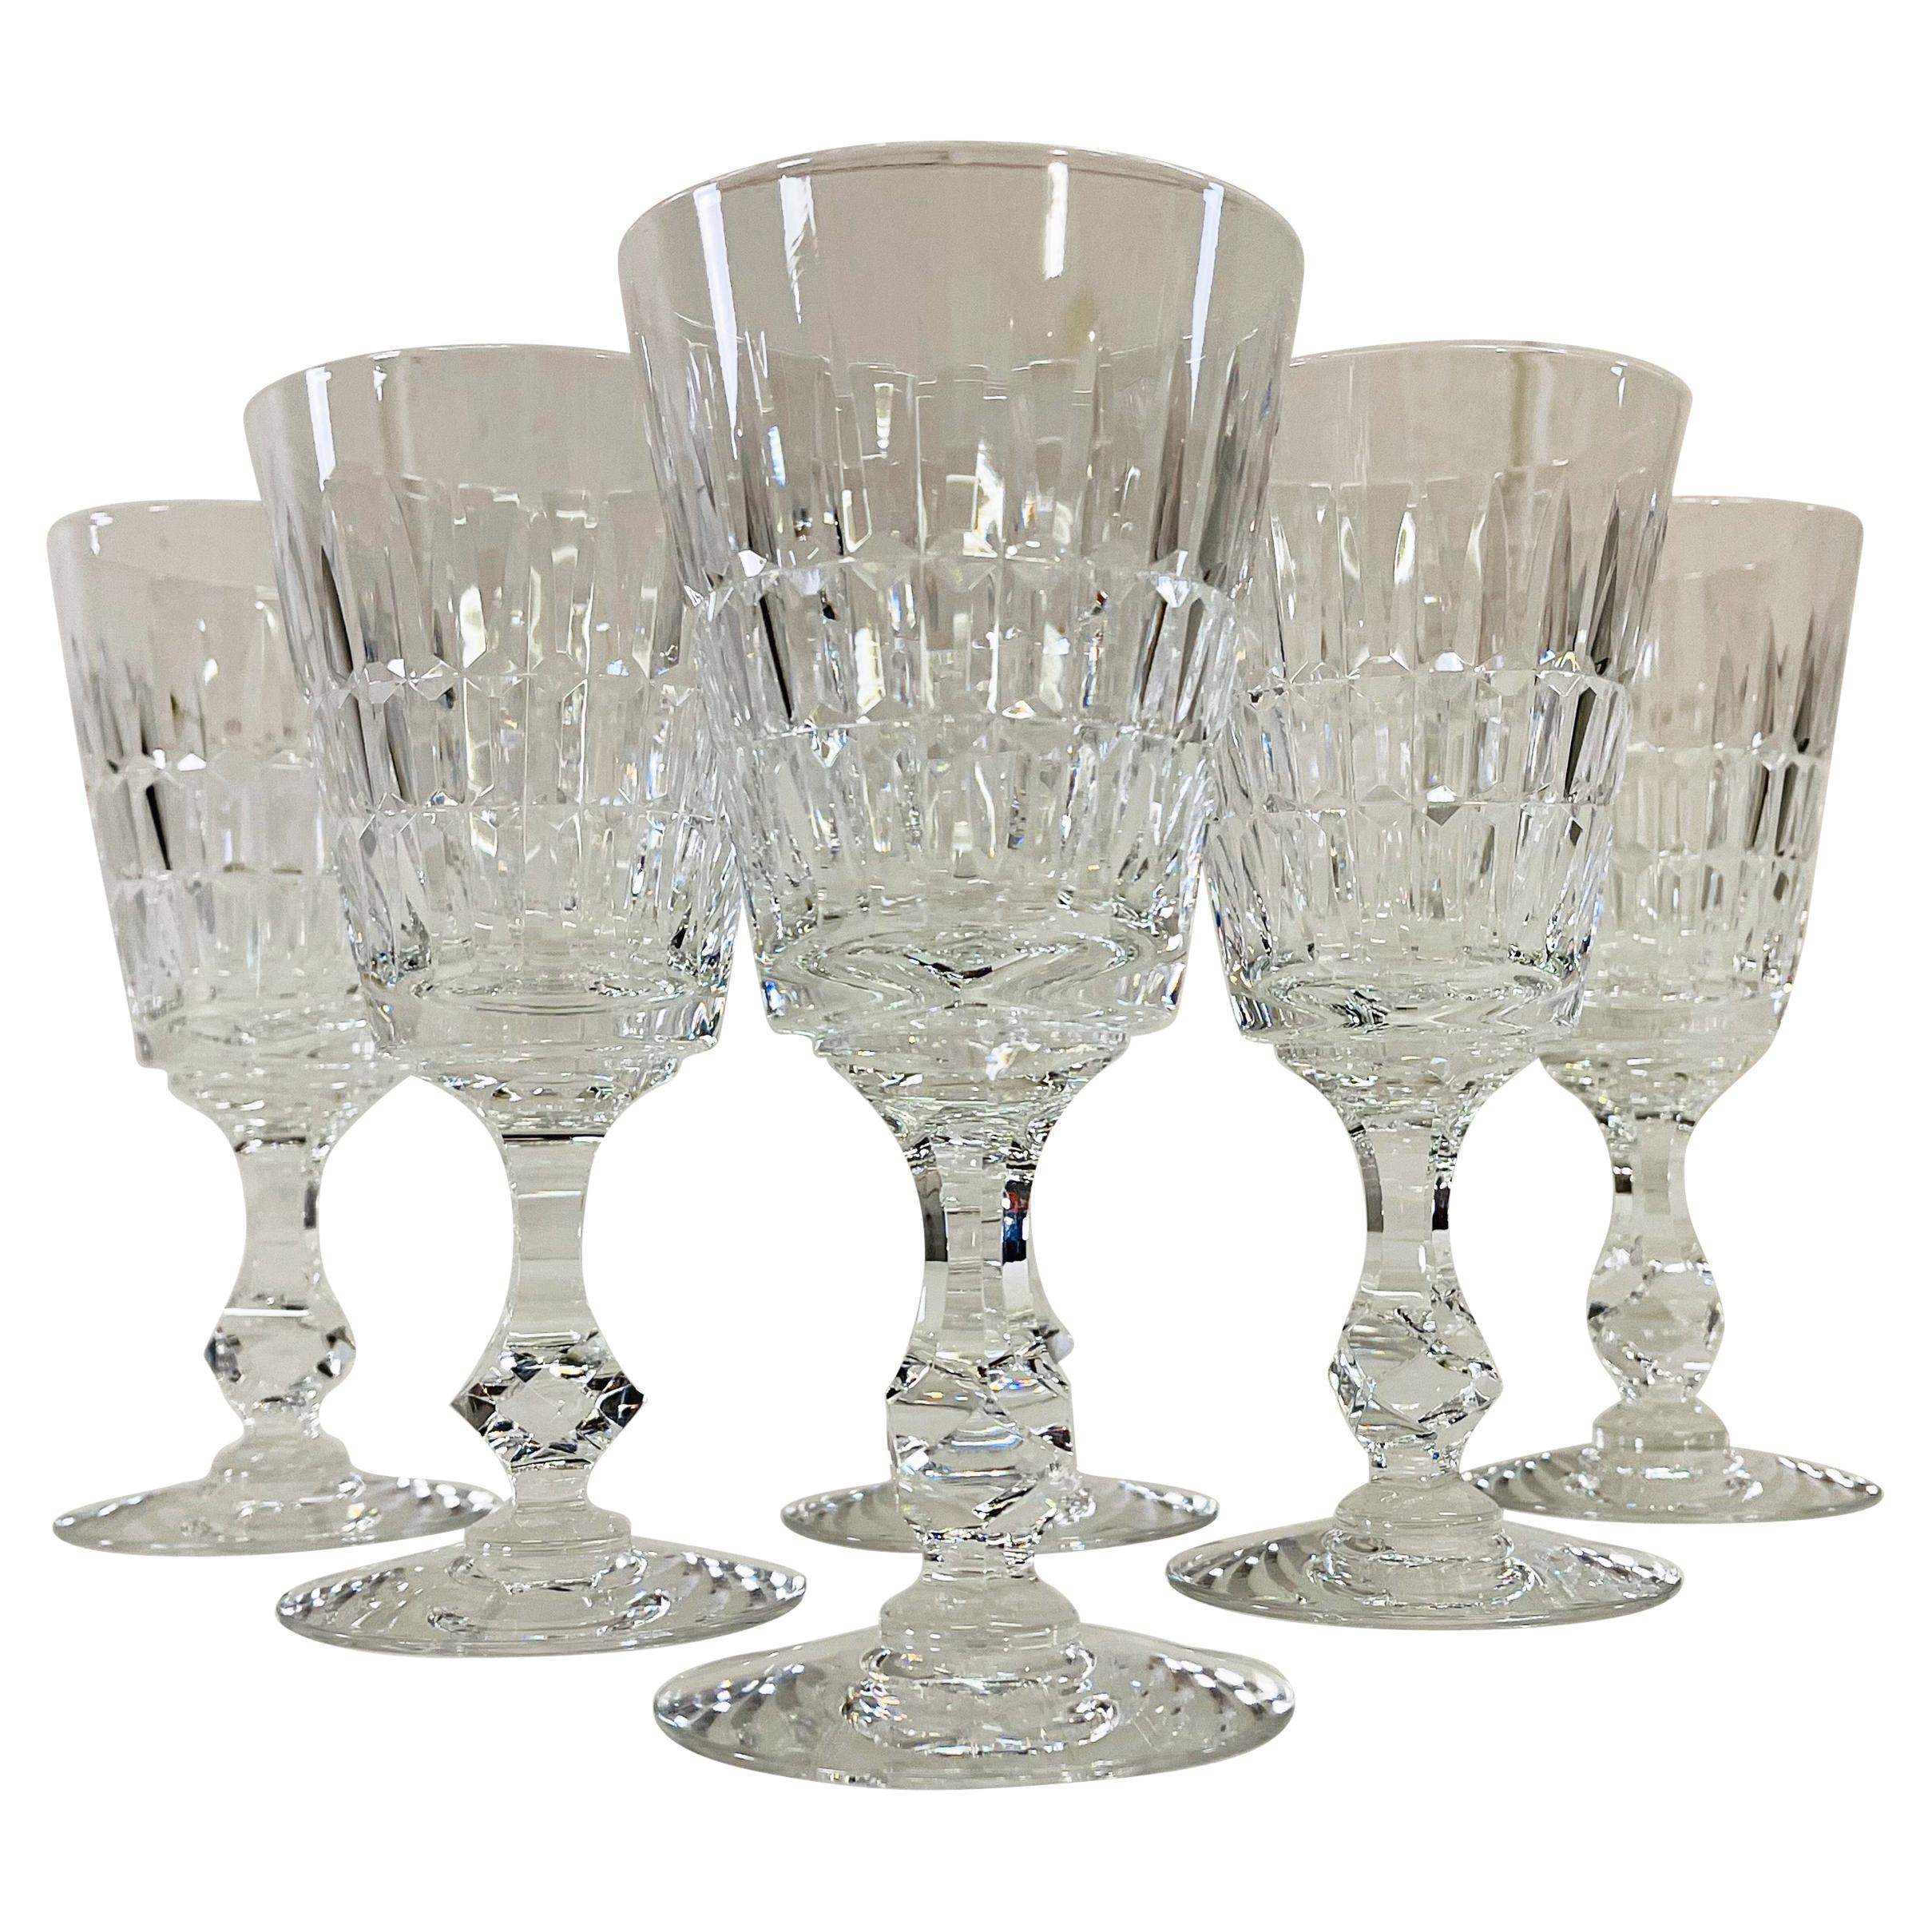 https://a.1stdibscdn.com/1960s-mitred-cut-crystal-glass-wine-stems-set-of-6-for-sale/1121189/f_244590021626112654788/24459002_master.jpg